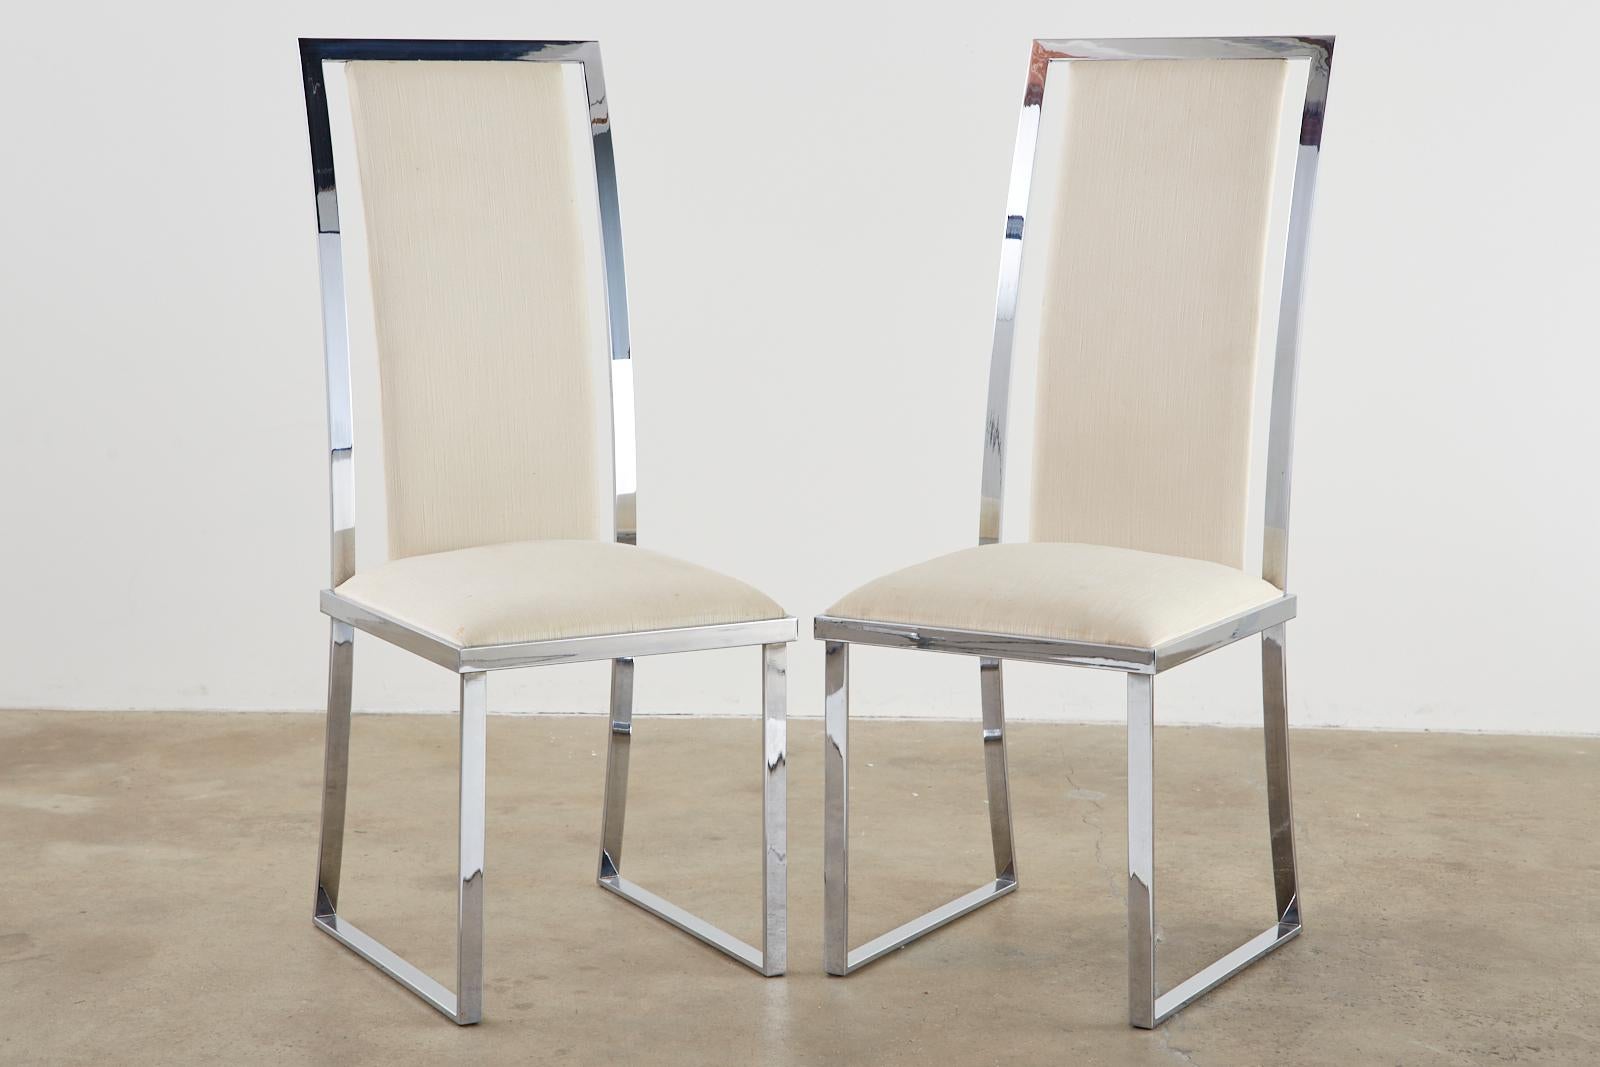 20th Century Set of Six Pierre Cardin Flat Bar Chrome Dining Chairs For Sale